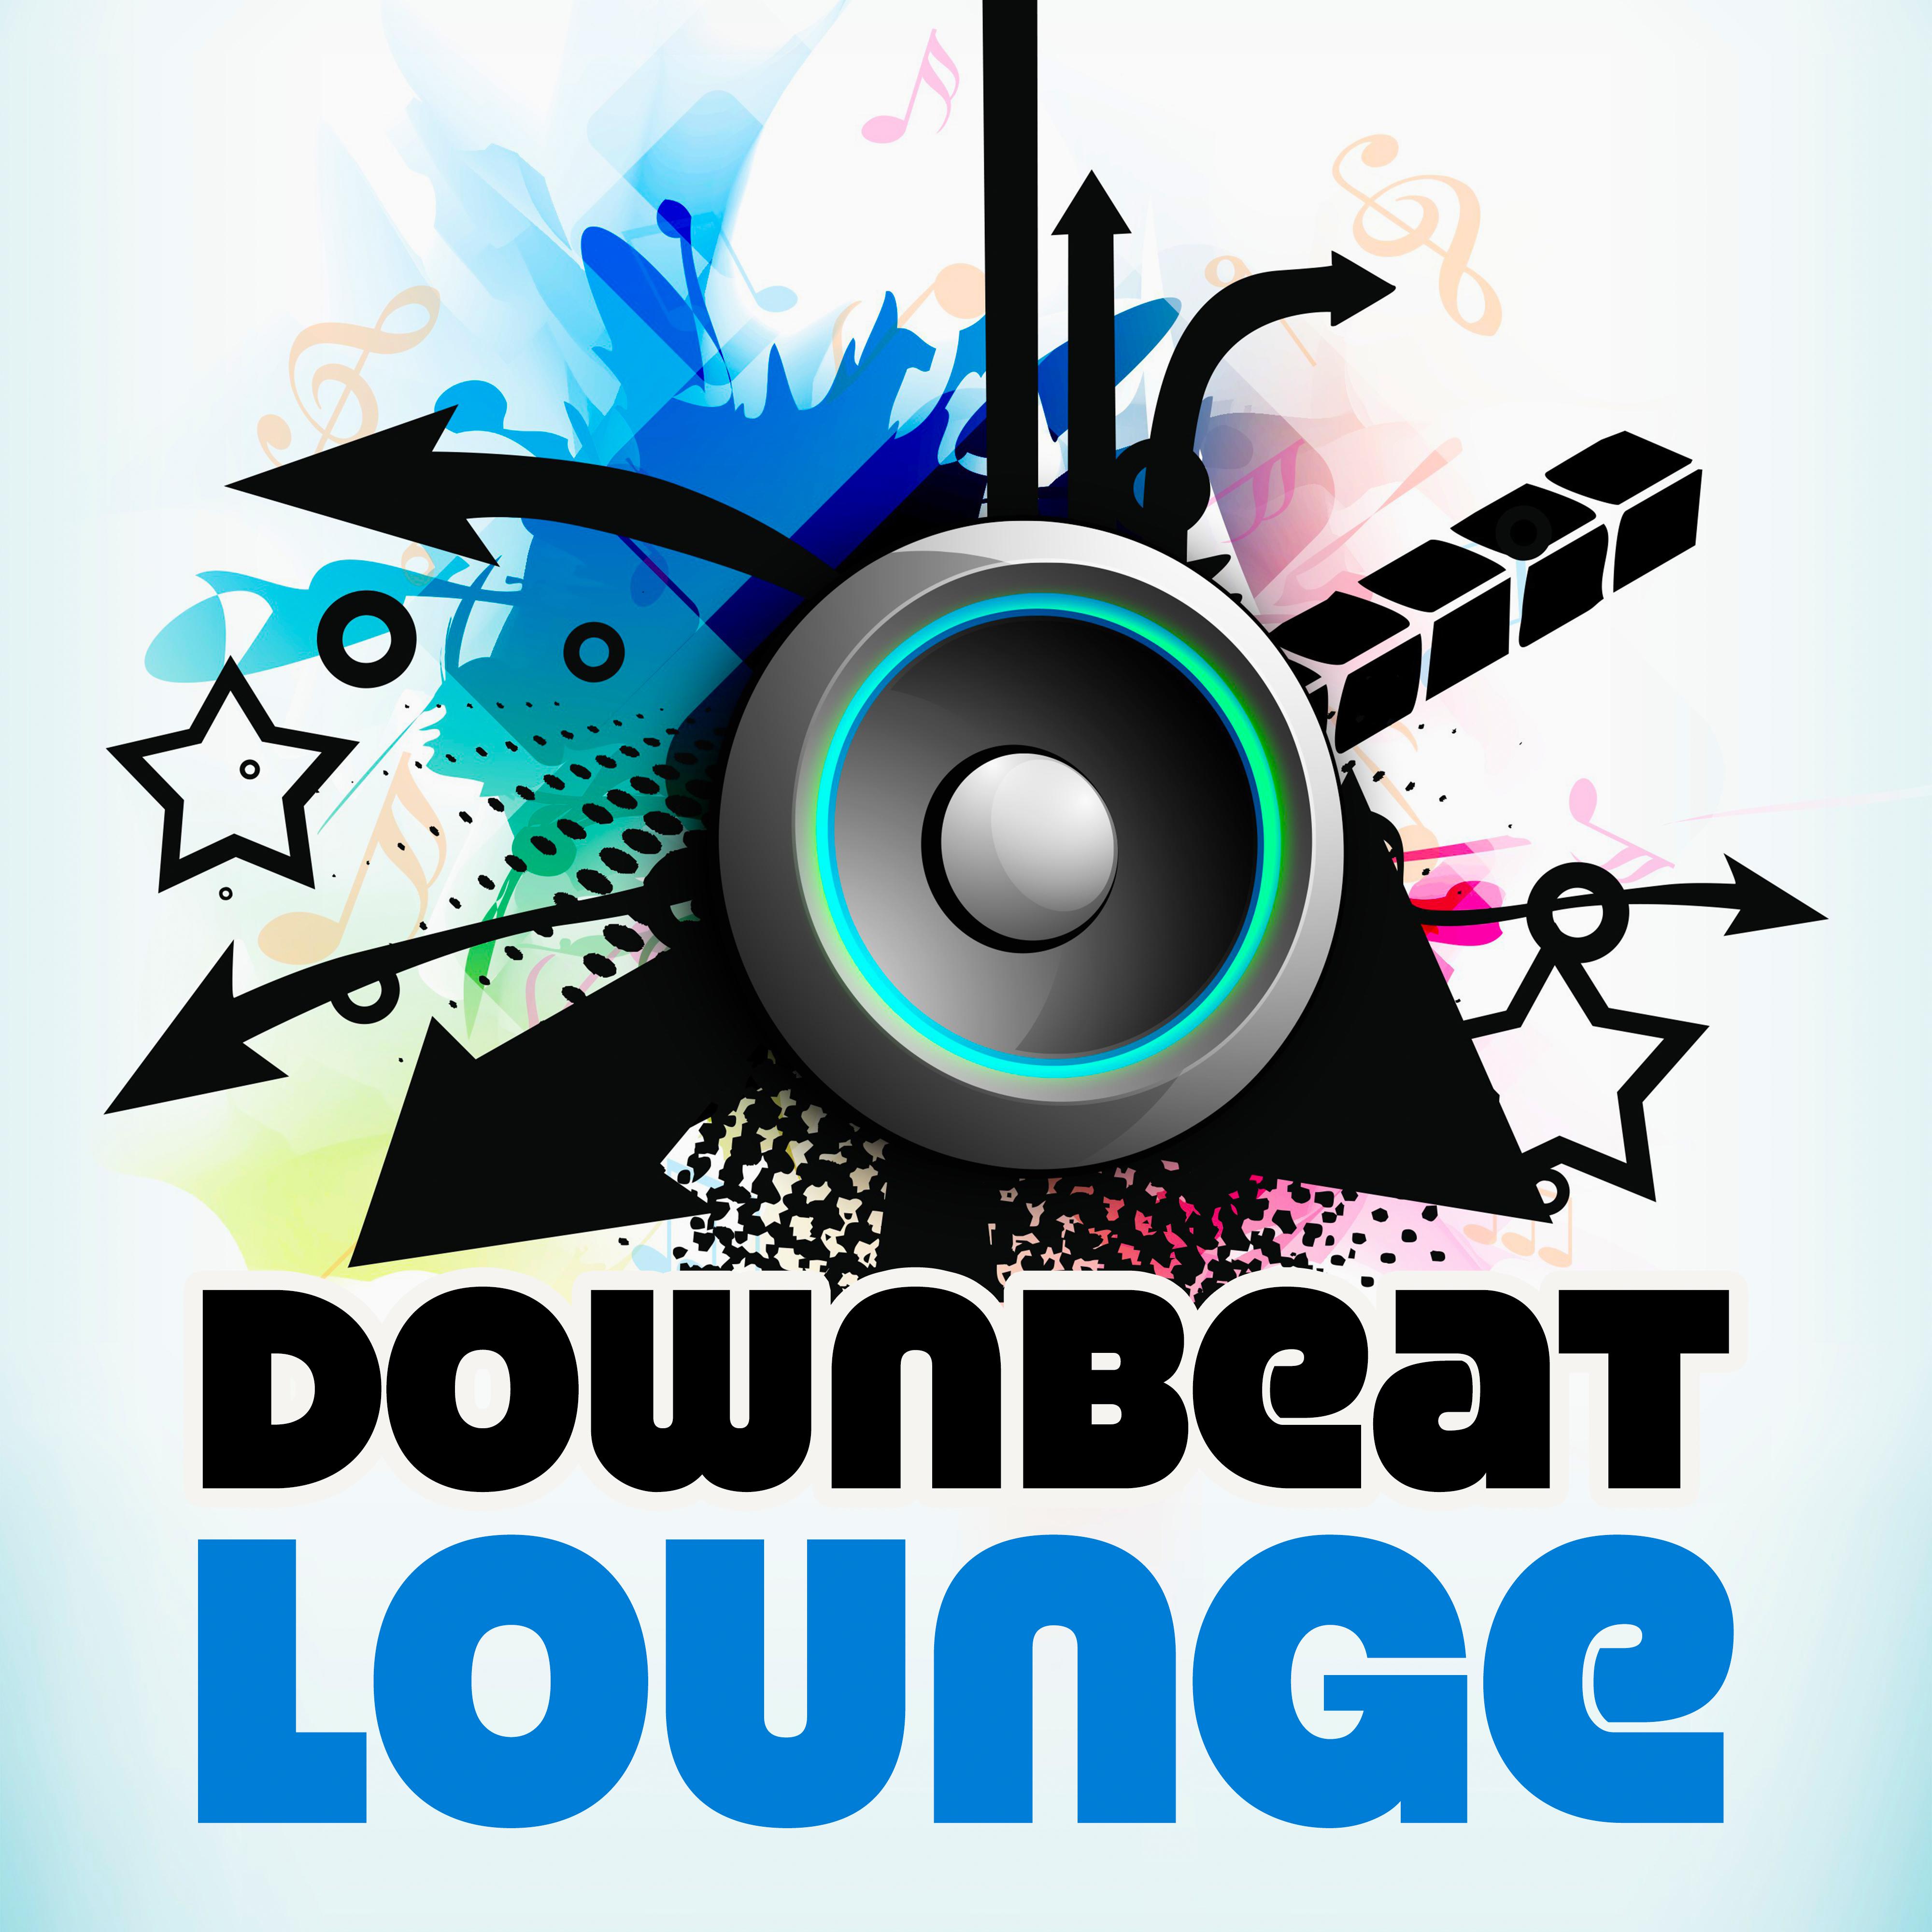 Downbeat Lounge – Chill Out 2017, Hot Beats, Lounge, Summer, Chillout 04 Ever, Mr Chillout